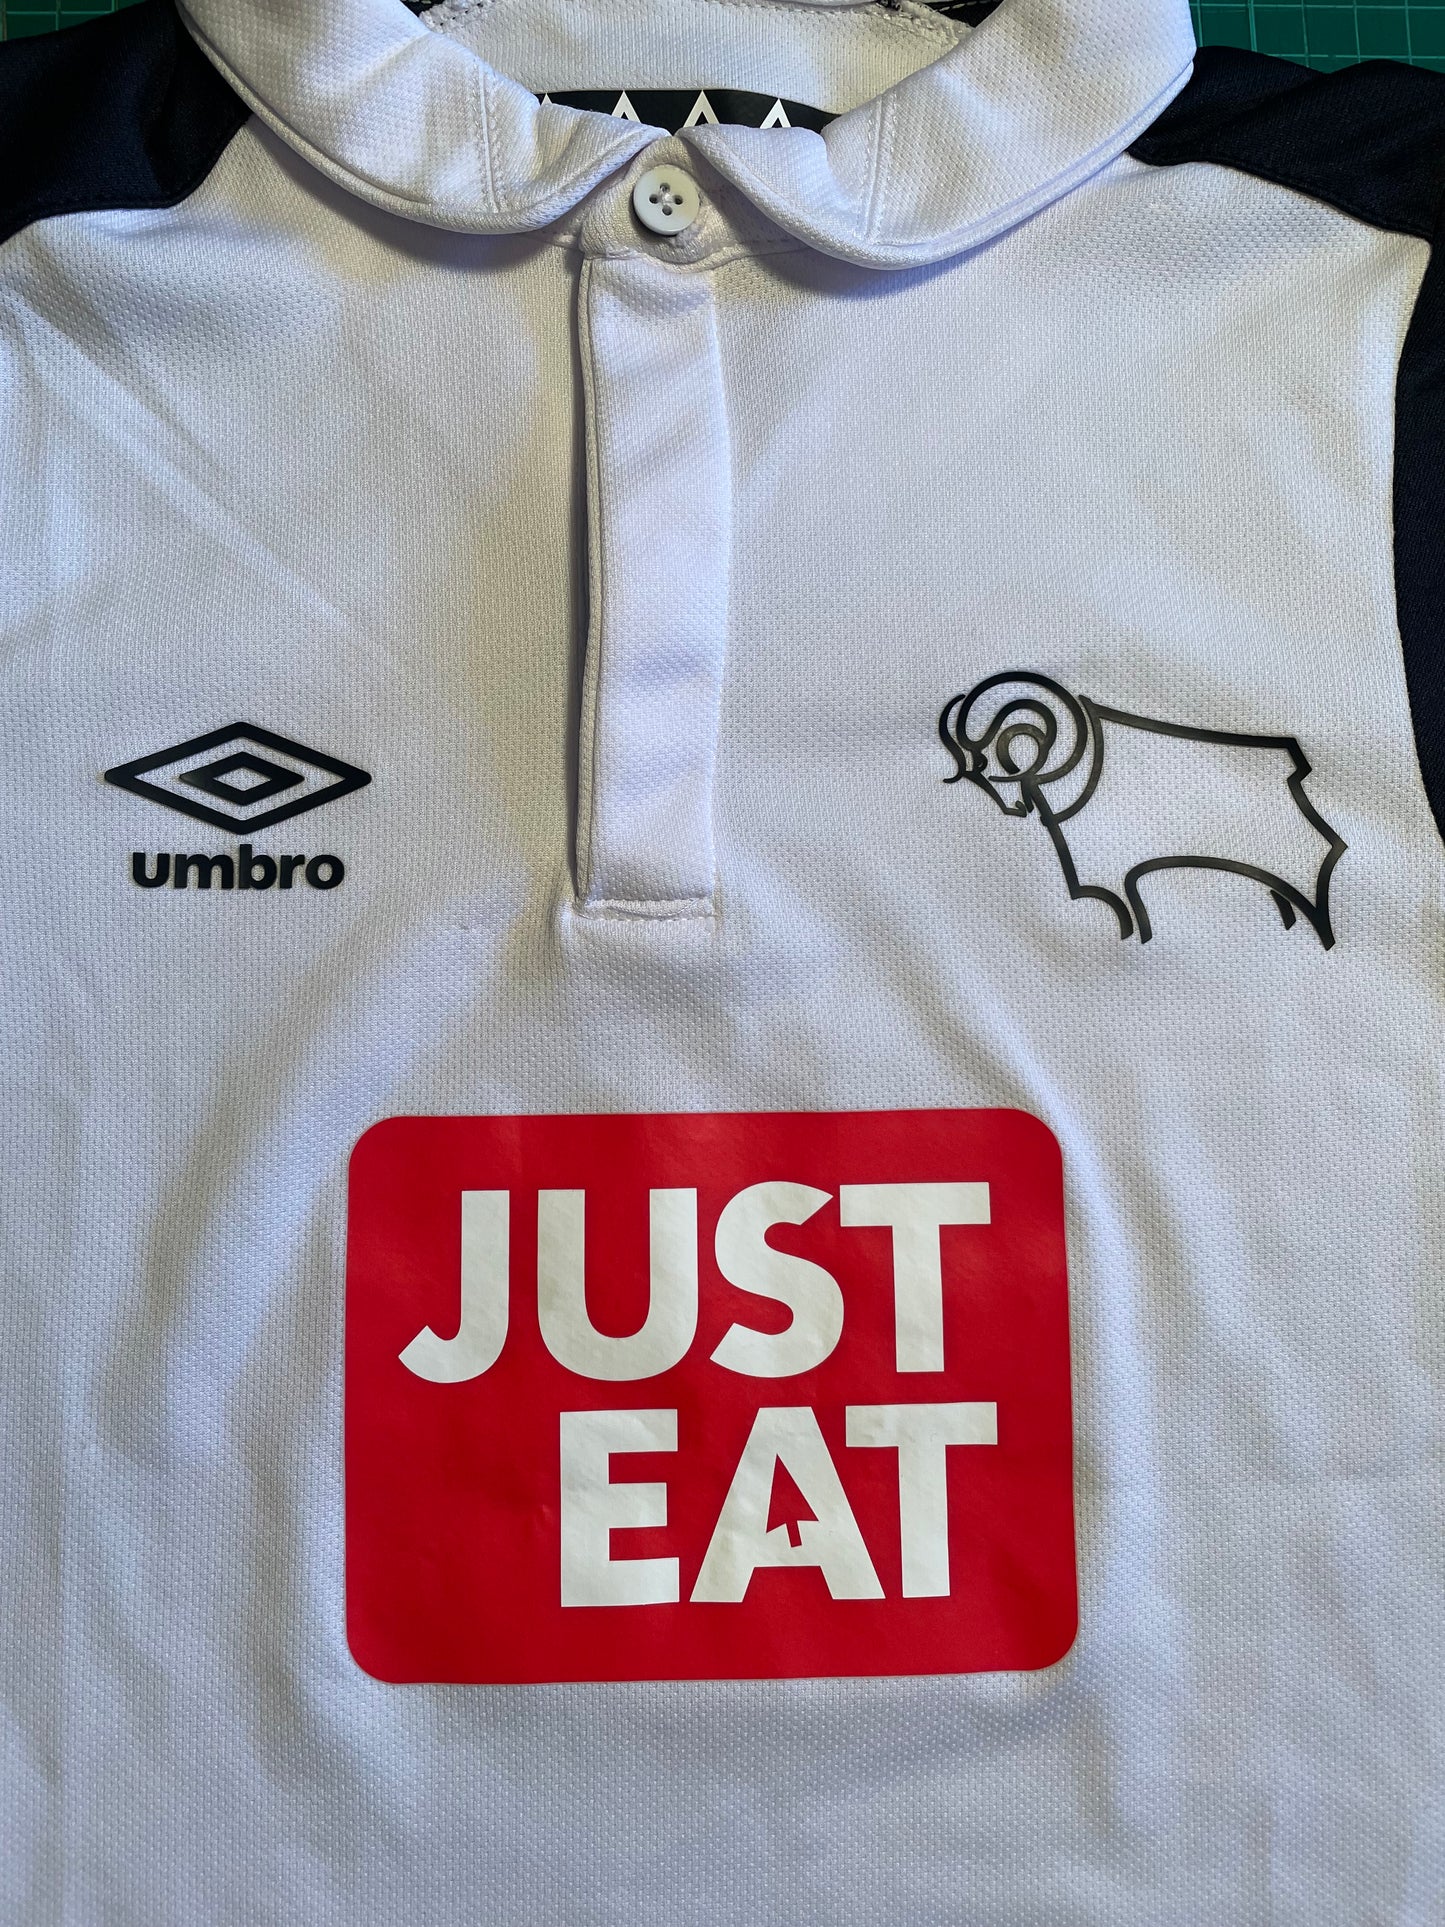 Derby County Home Shirt 2016/17 (excellent) Small Boys. Height 18.5 inches